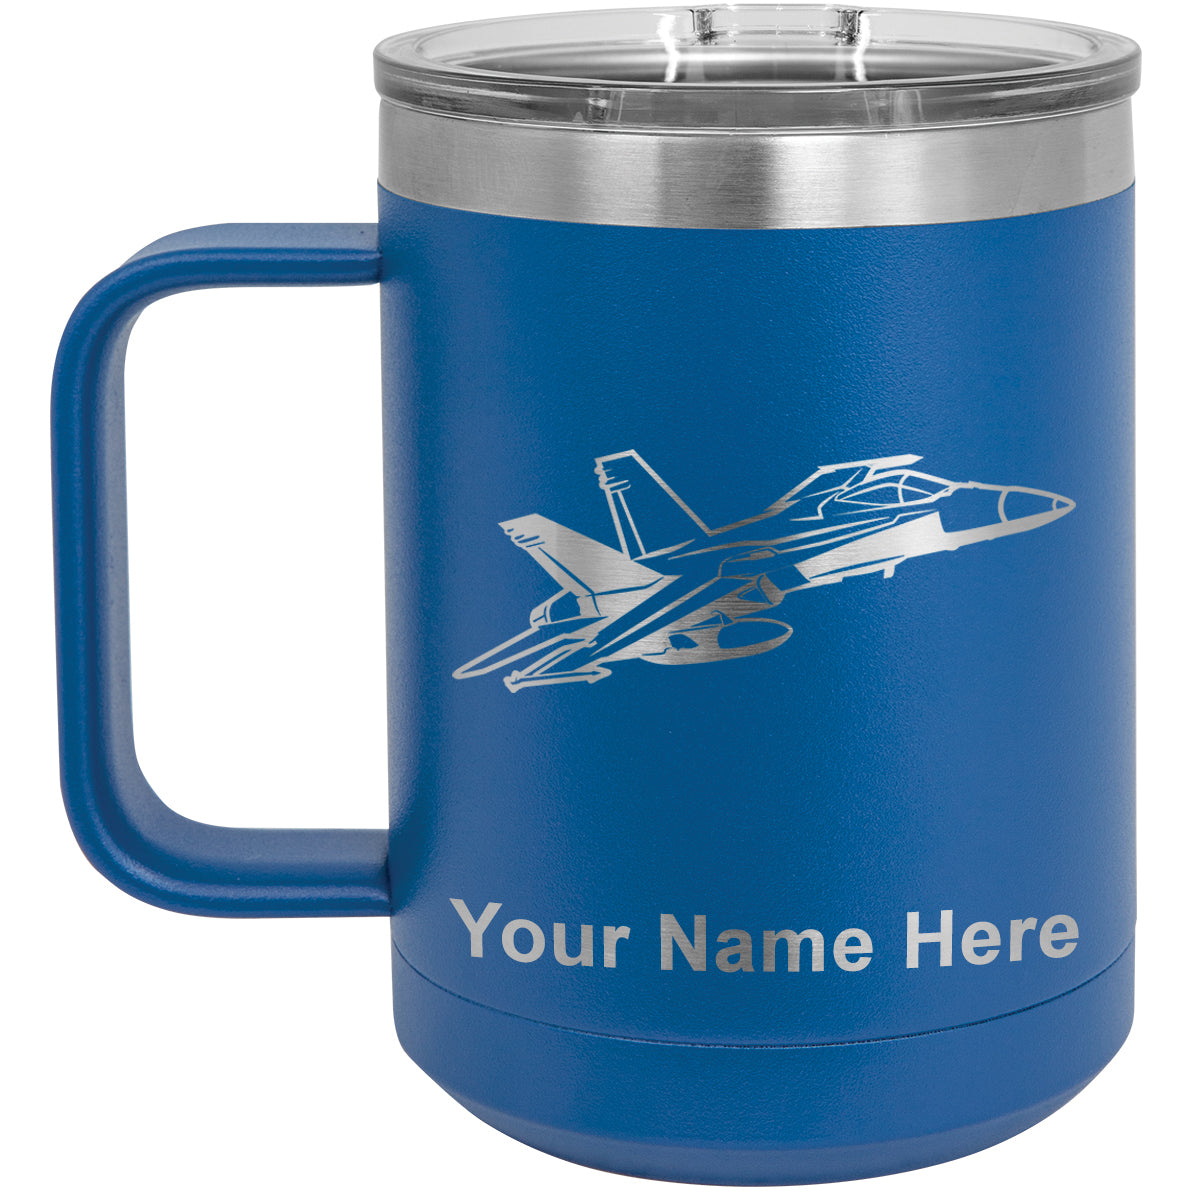 15oz Vacuum Insulated Coffee Mug, Fighter Jet 2, Personalized Engraving Included